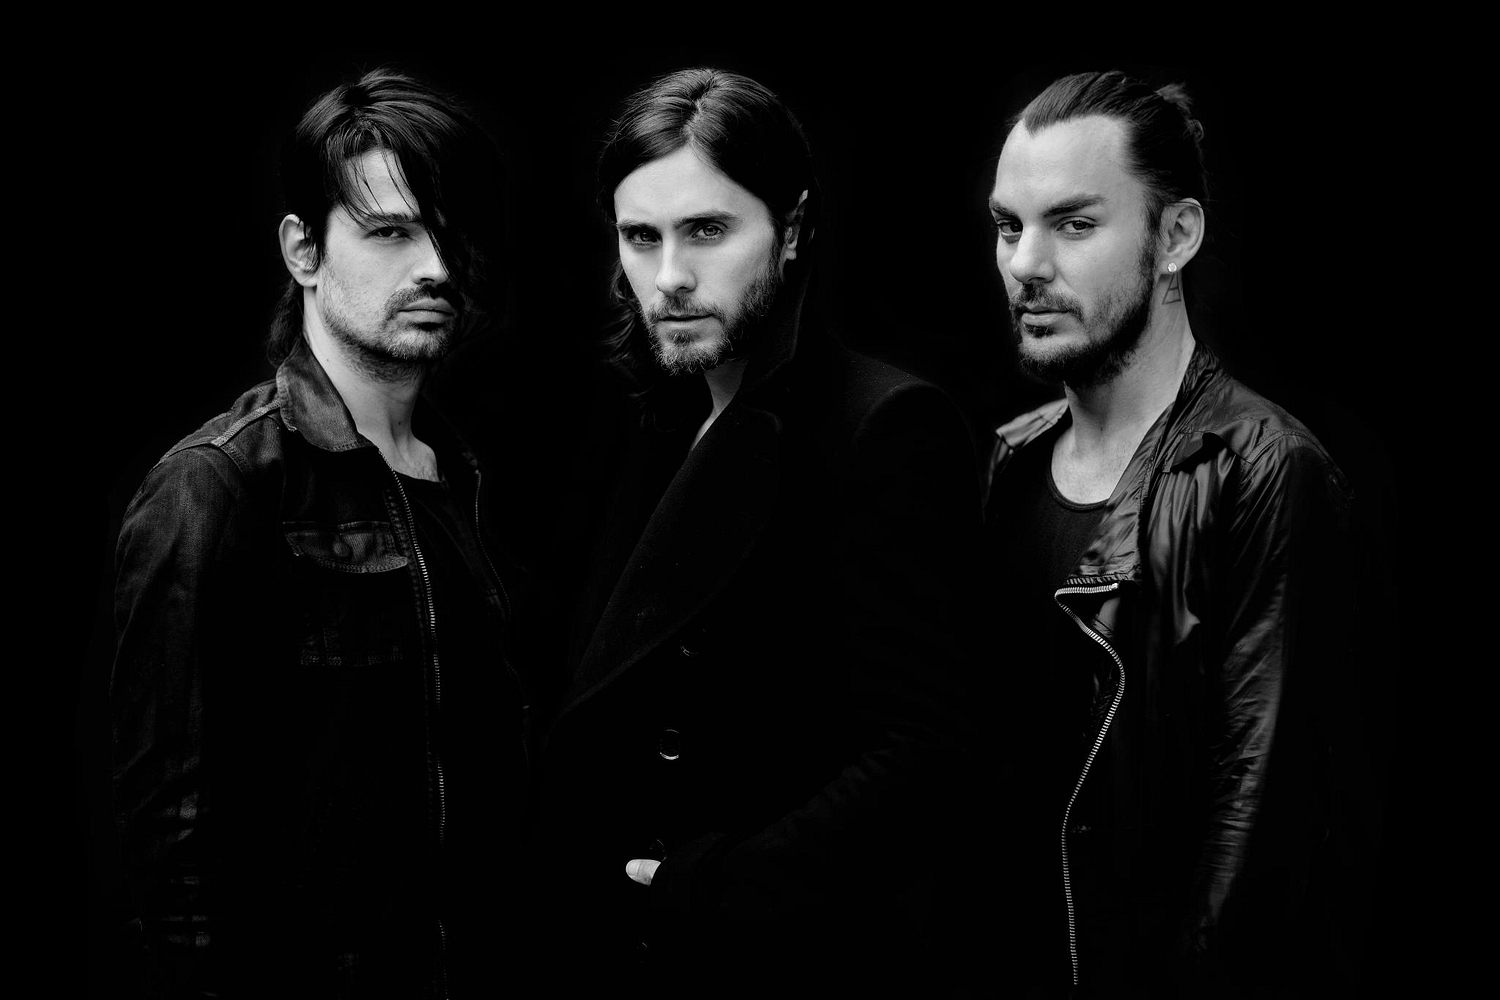 30 Seconds to Mars’ ‘big announcement’ is Camp Mars 2016